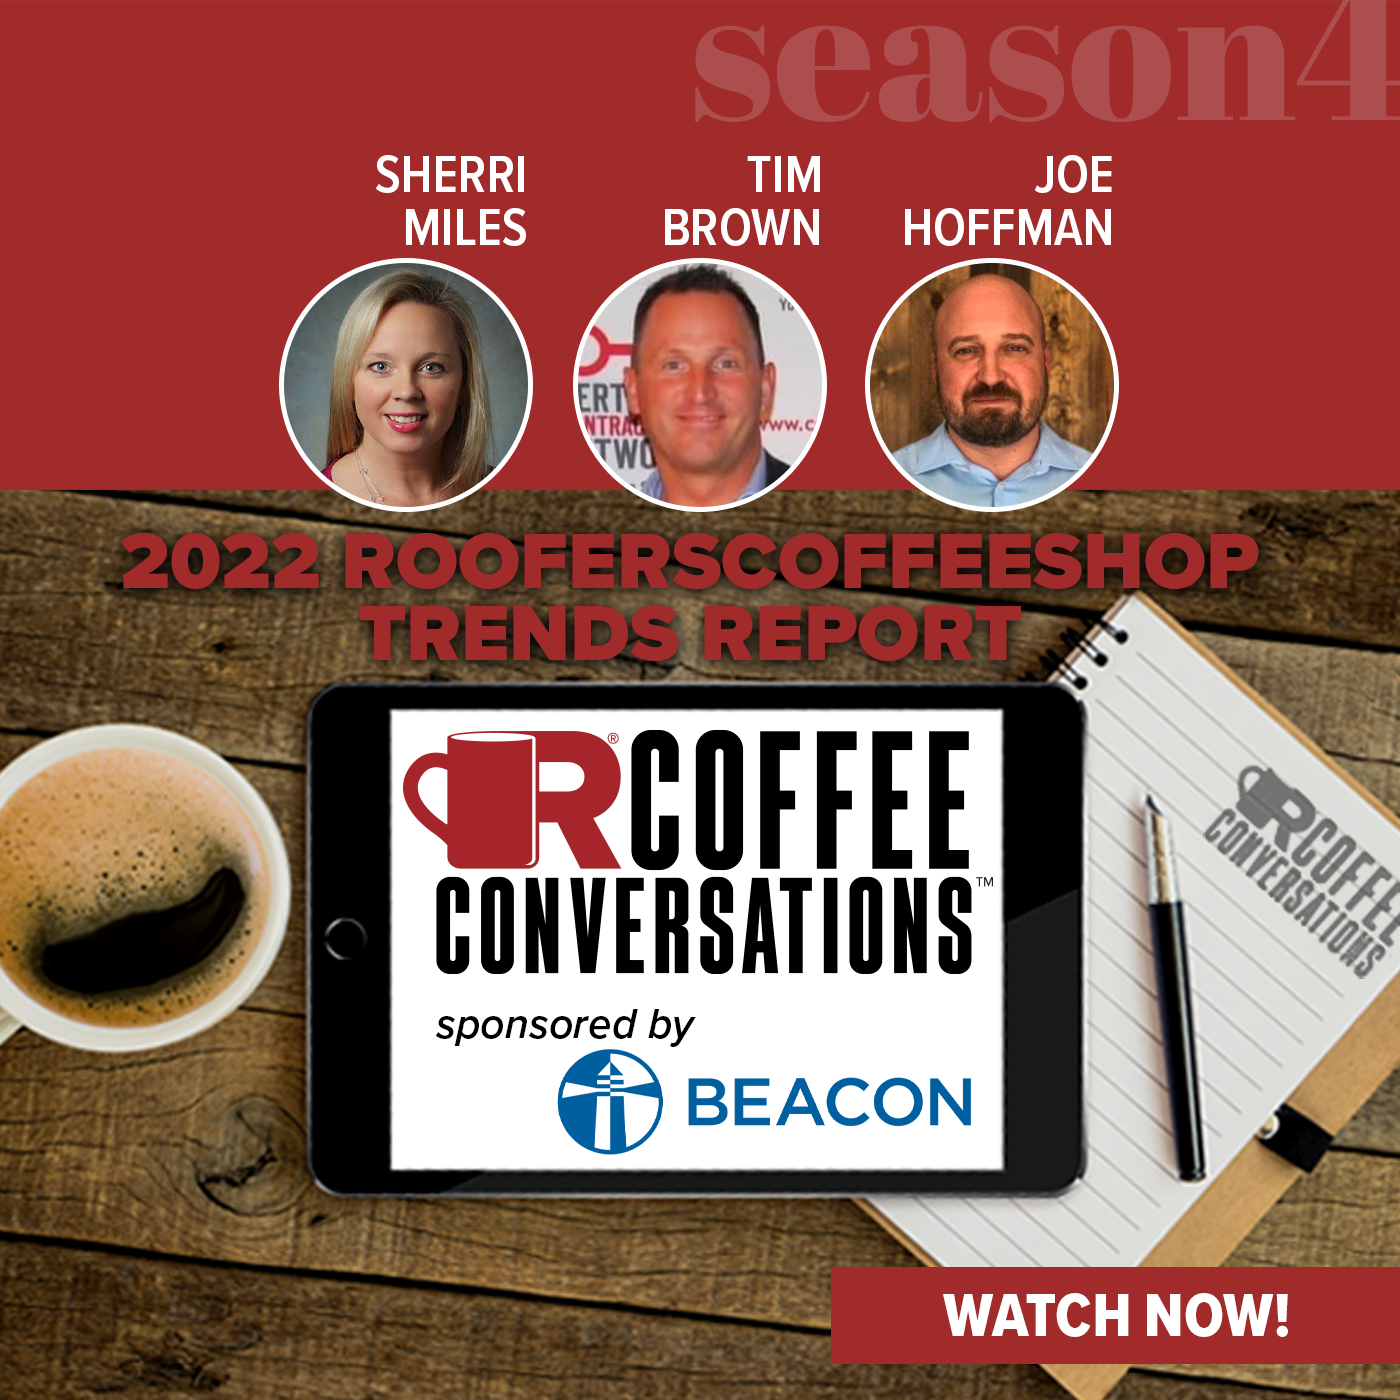 Beacon - Coffee Conversations - The 2022 Trends Report! Sponsored by Beacon - POD